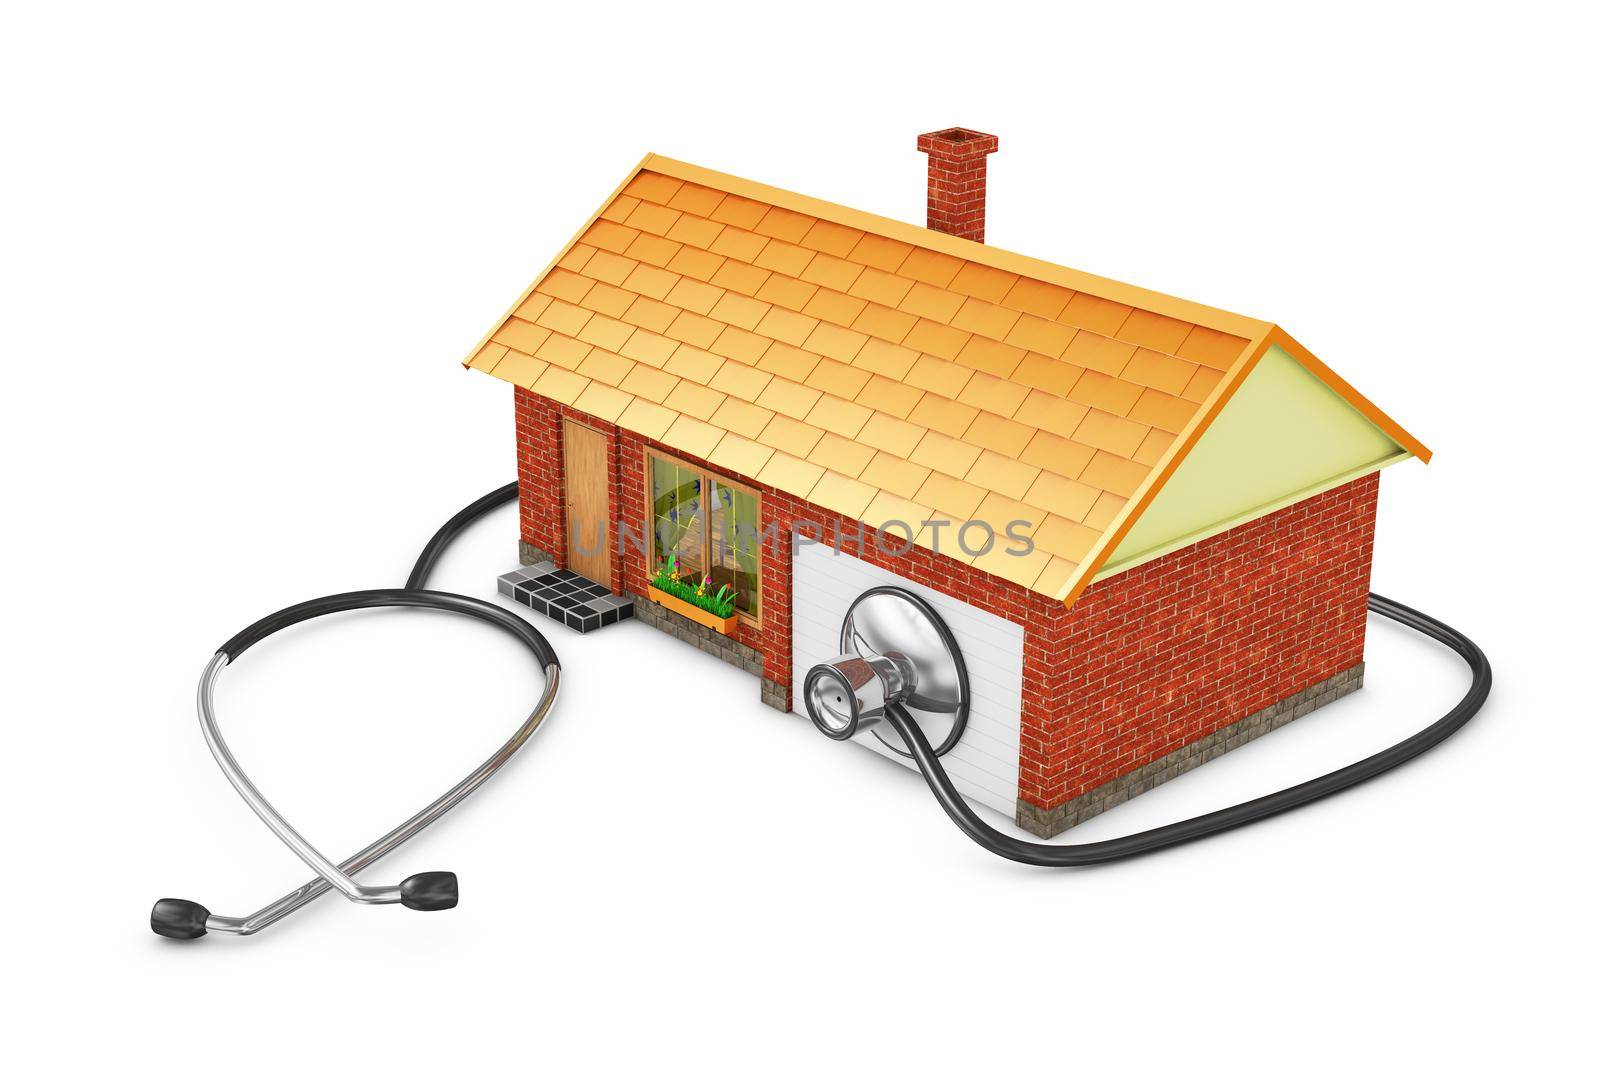 House and stethoscope on a white background.